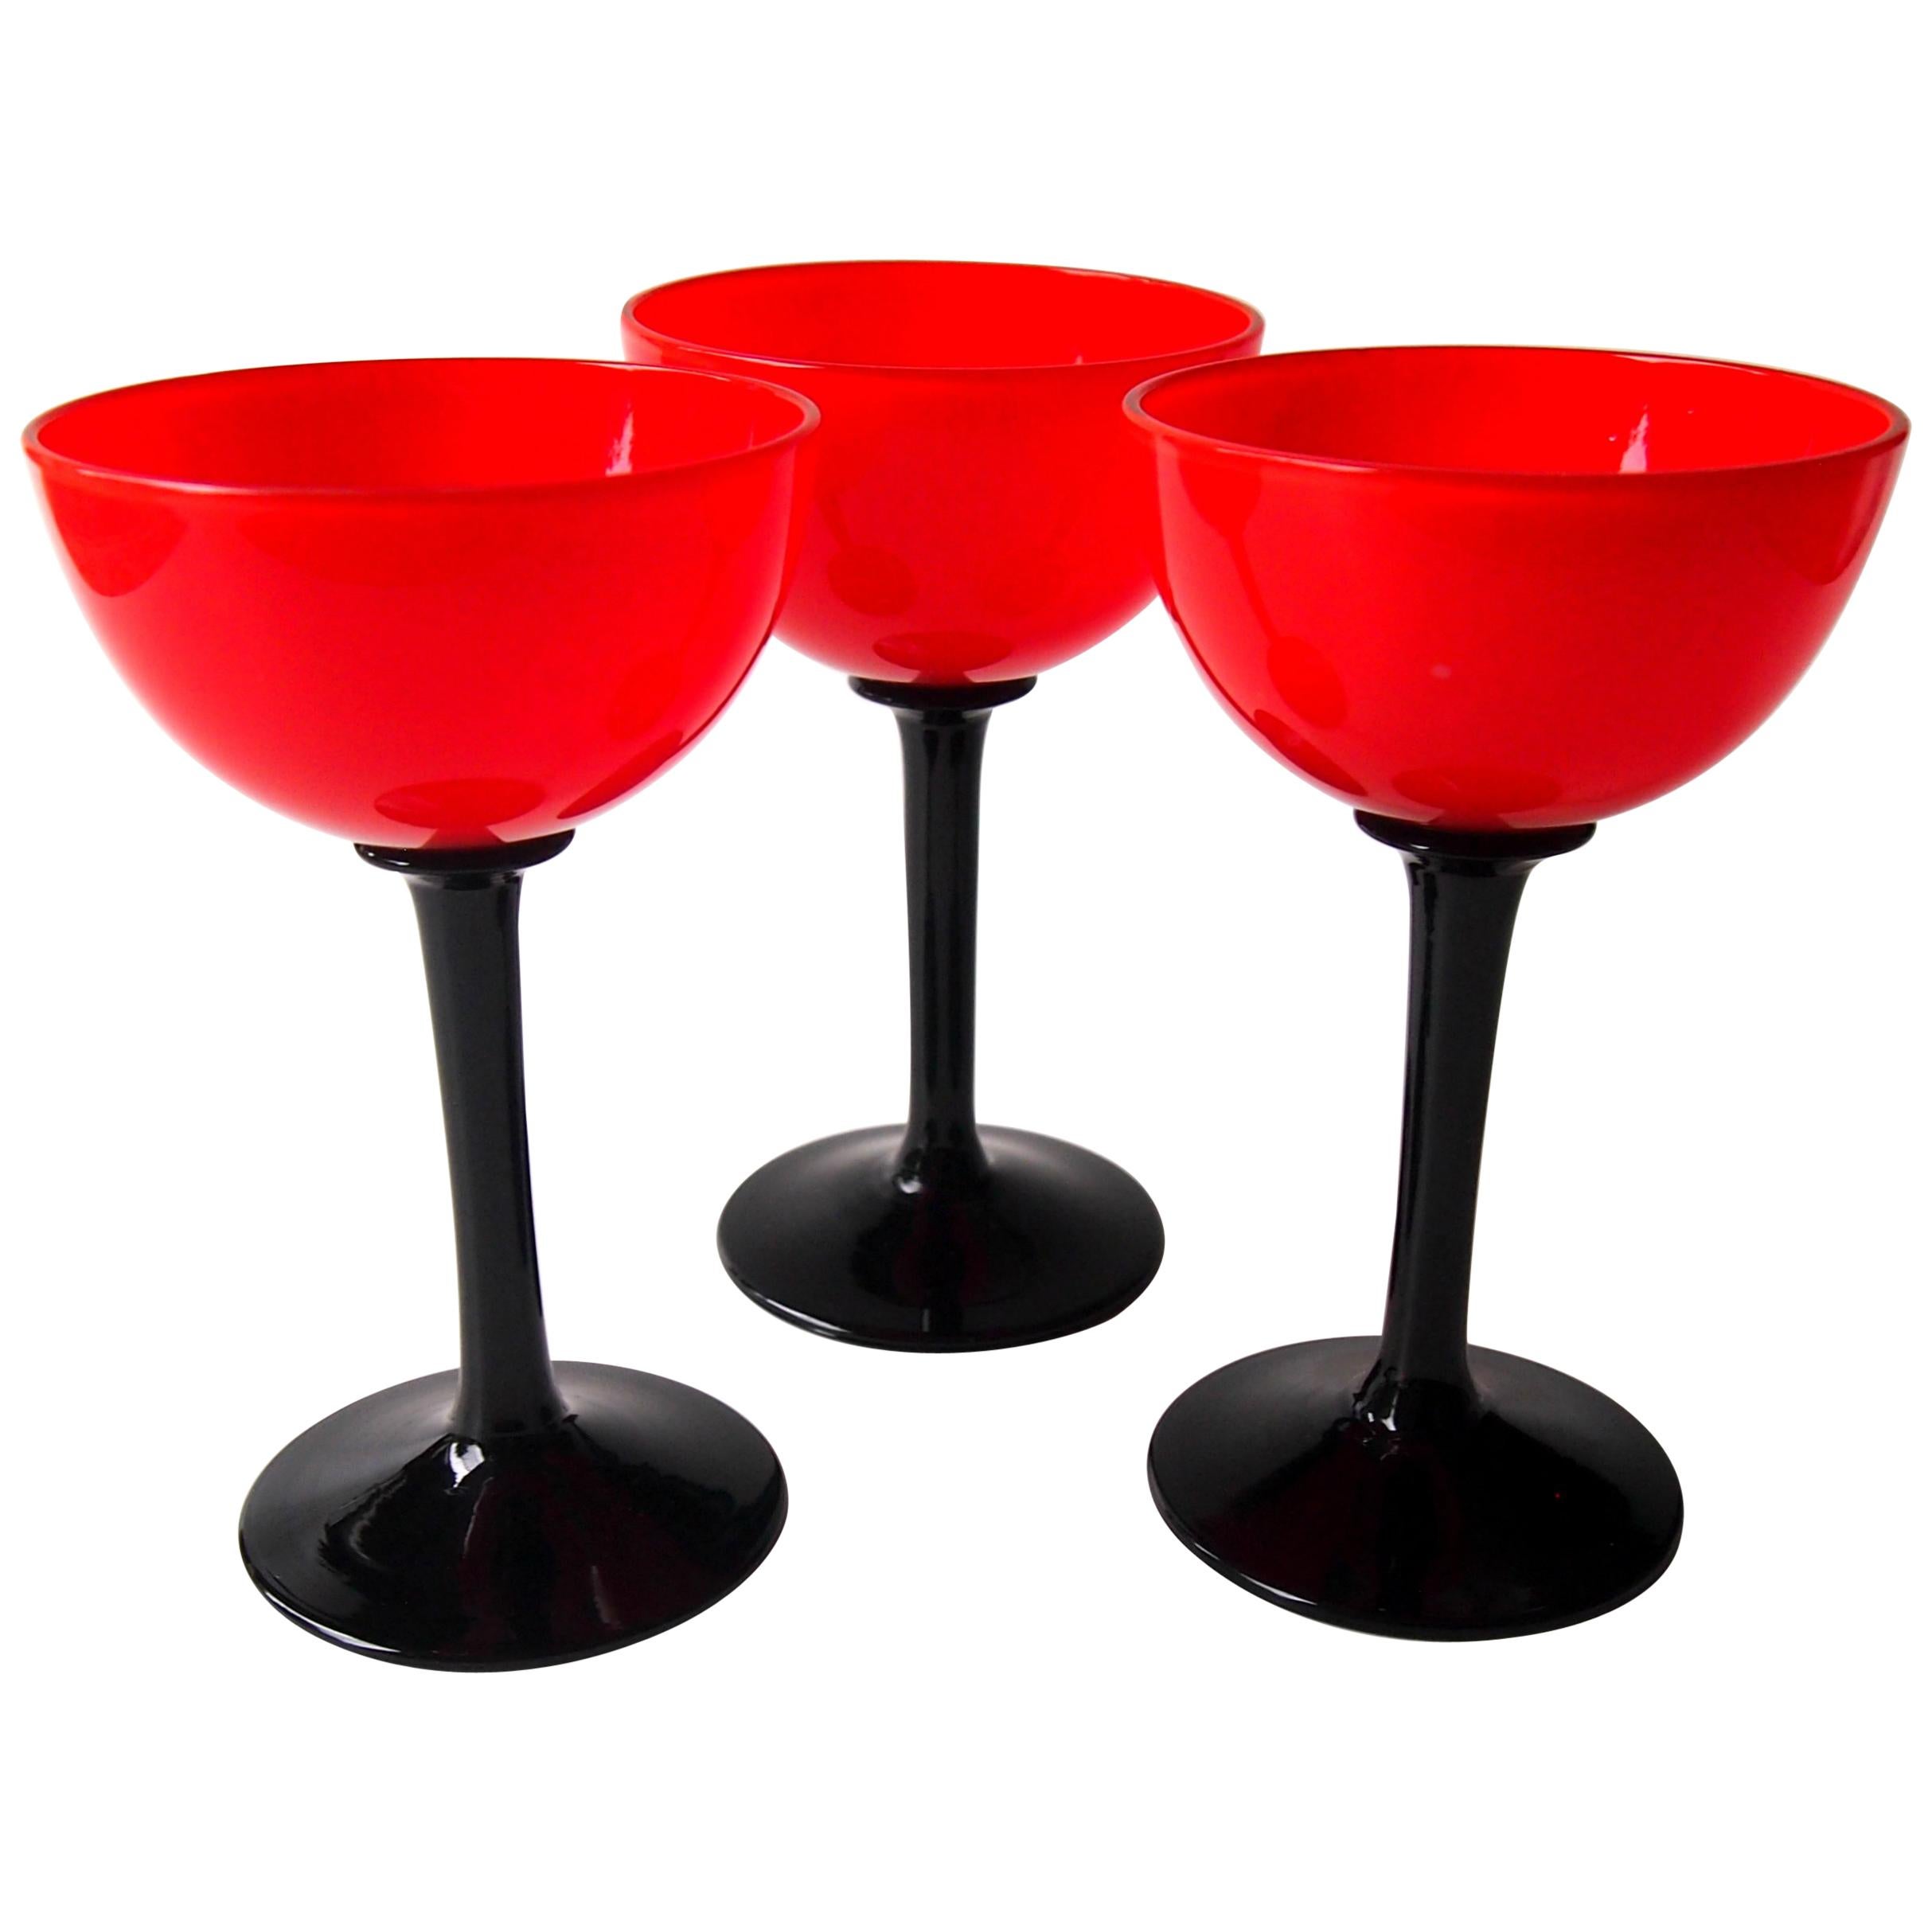 Trio of Bohemian Art Deco Red and Black 'Tango' Glasses by Harrach c1925